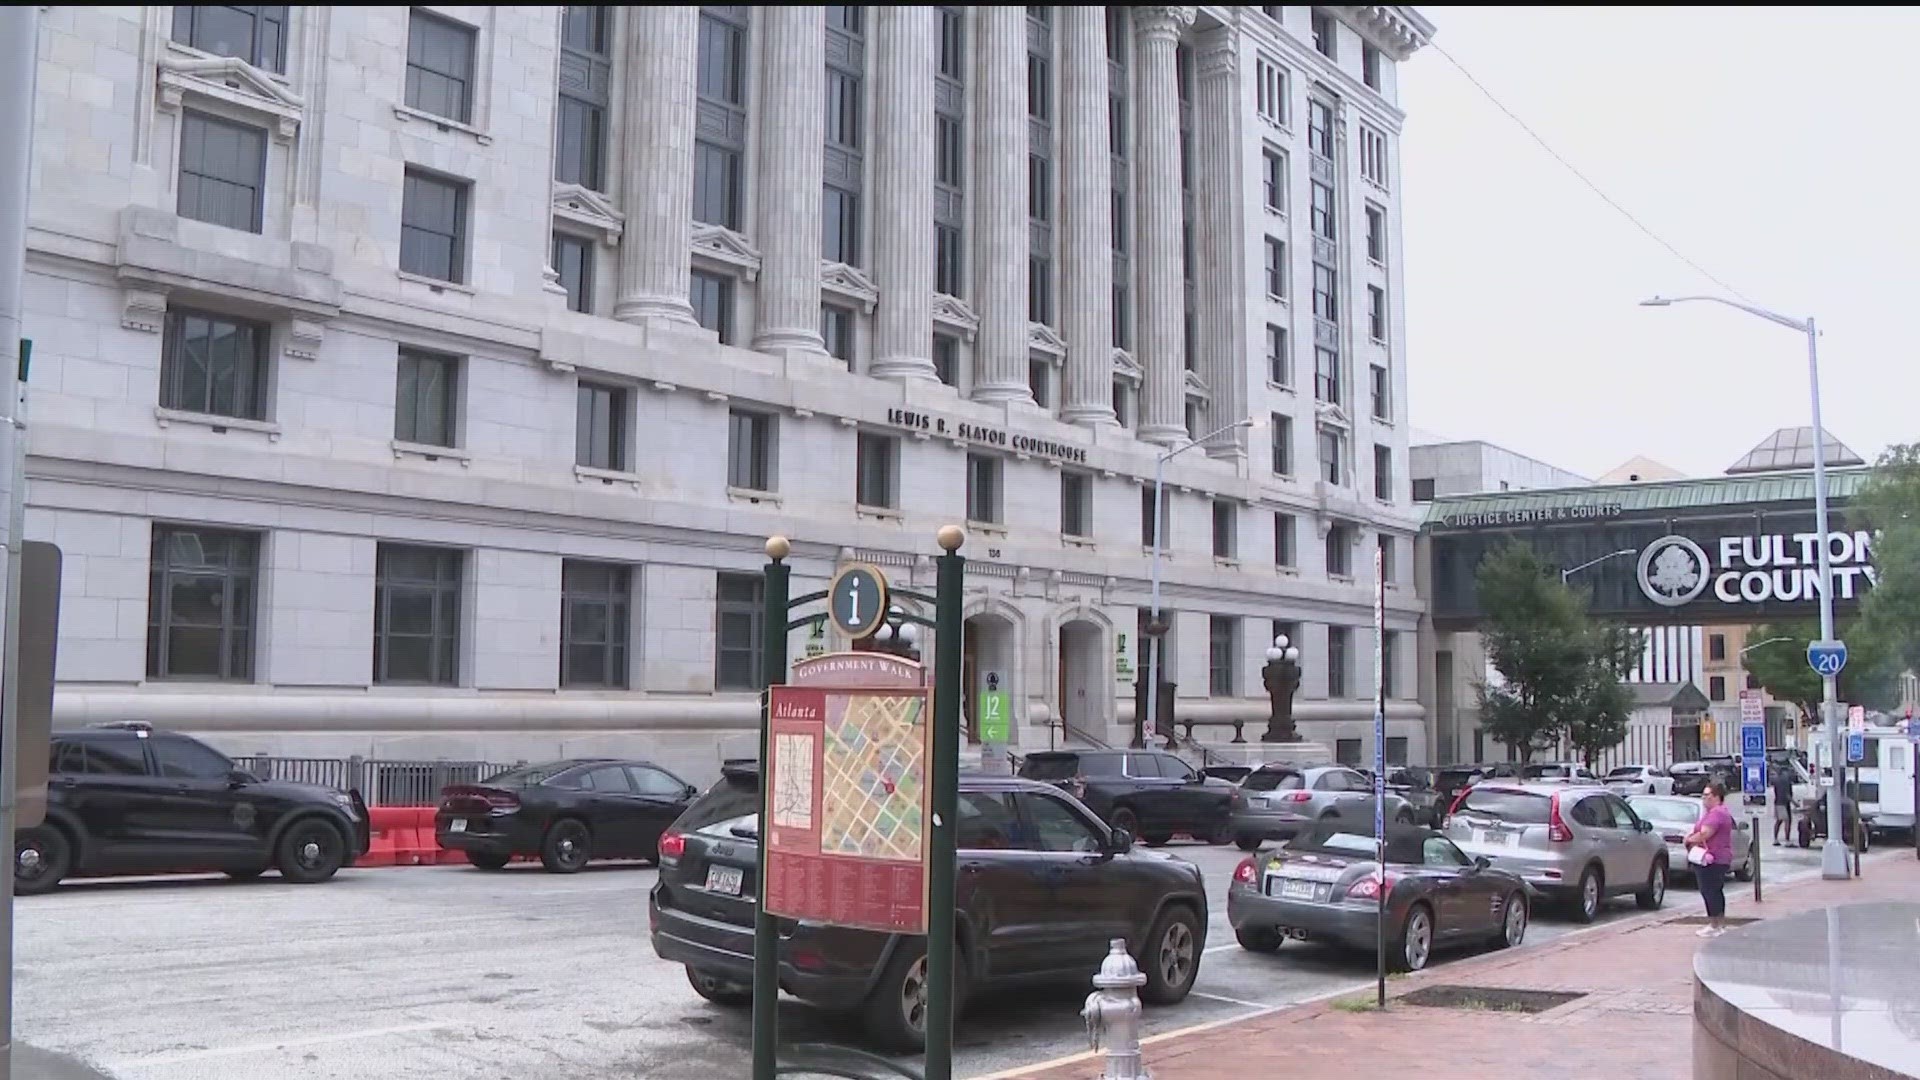 11Alive identified close to 20 Fulton County cases where prosecutors missed a 90-day deadline to obtain an indictment